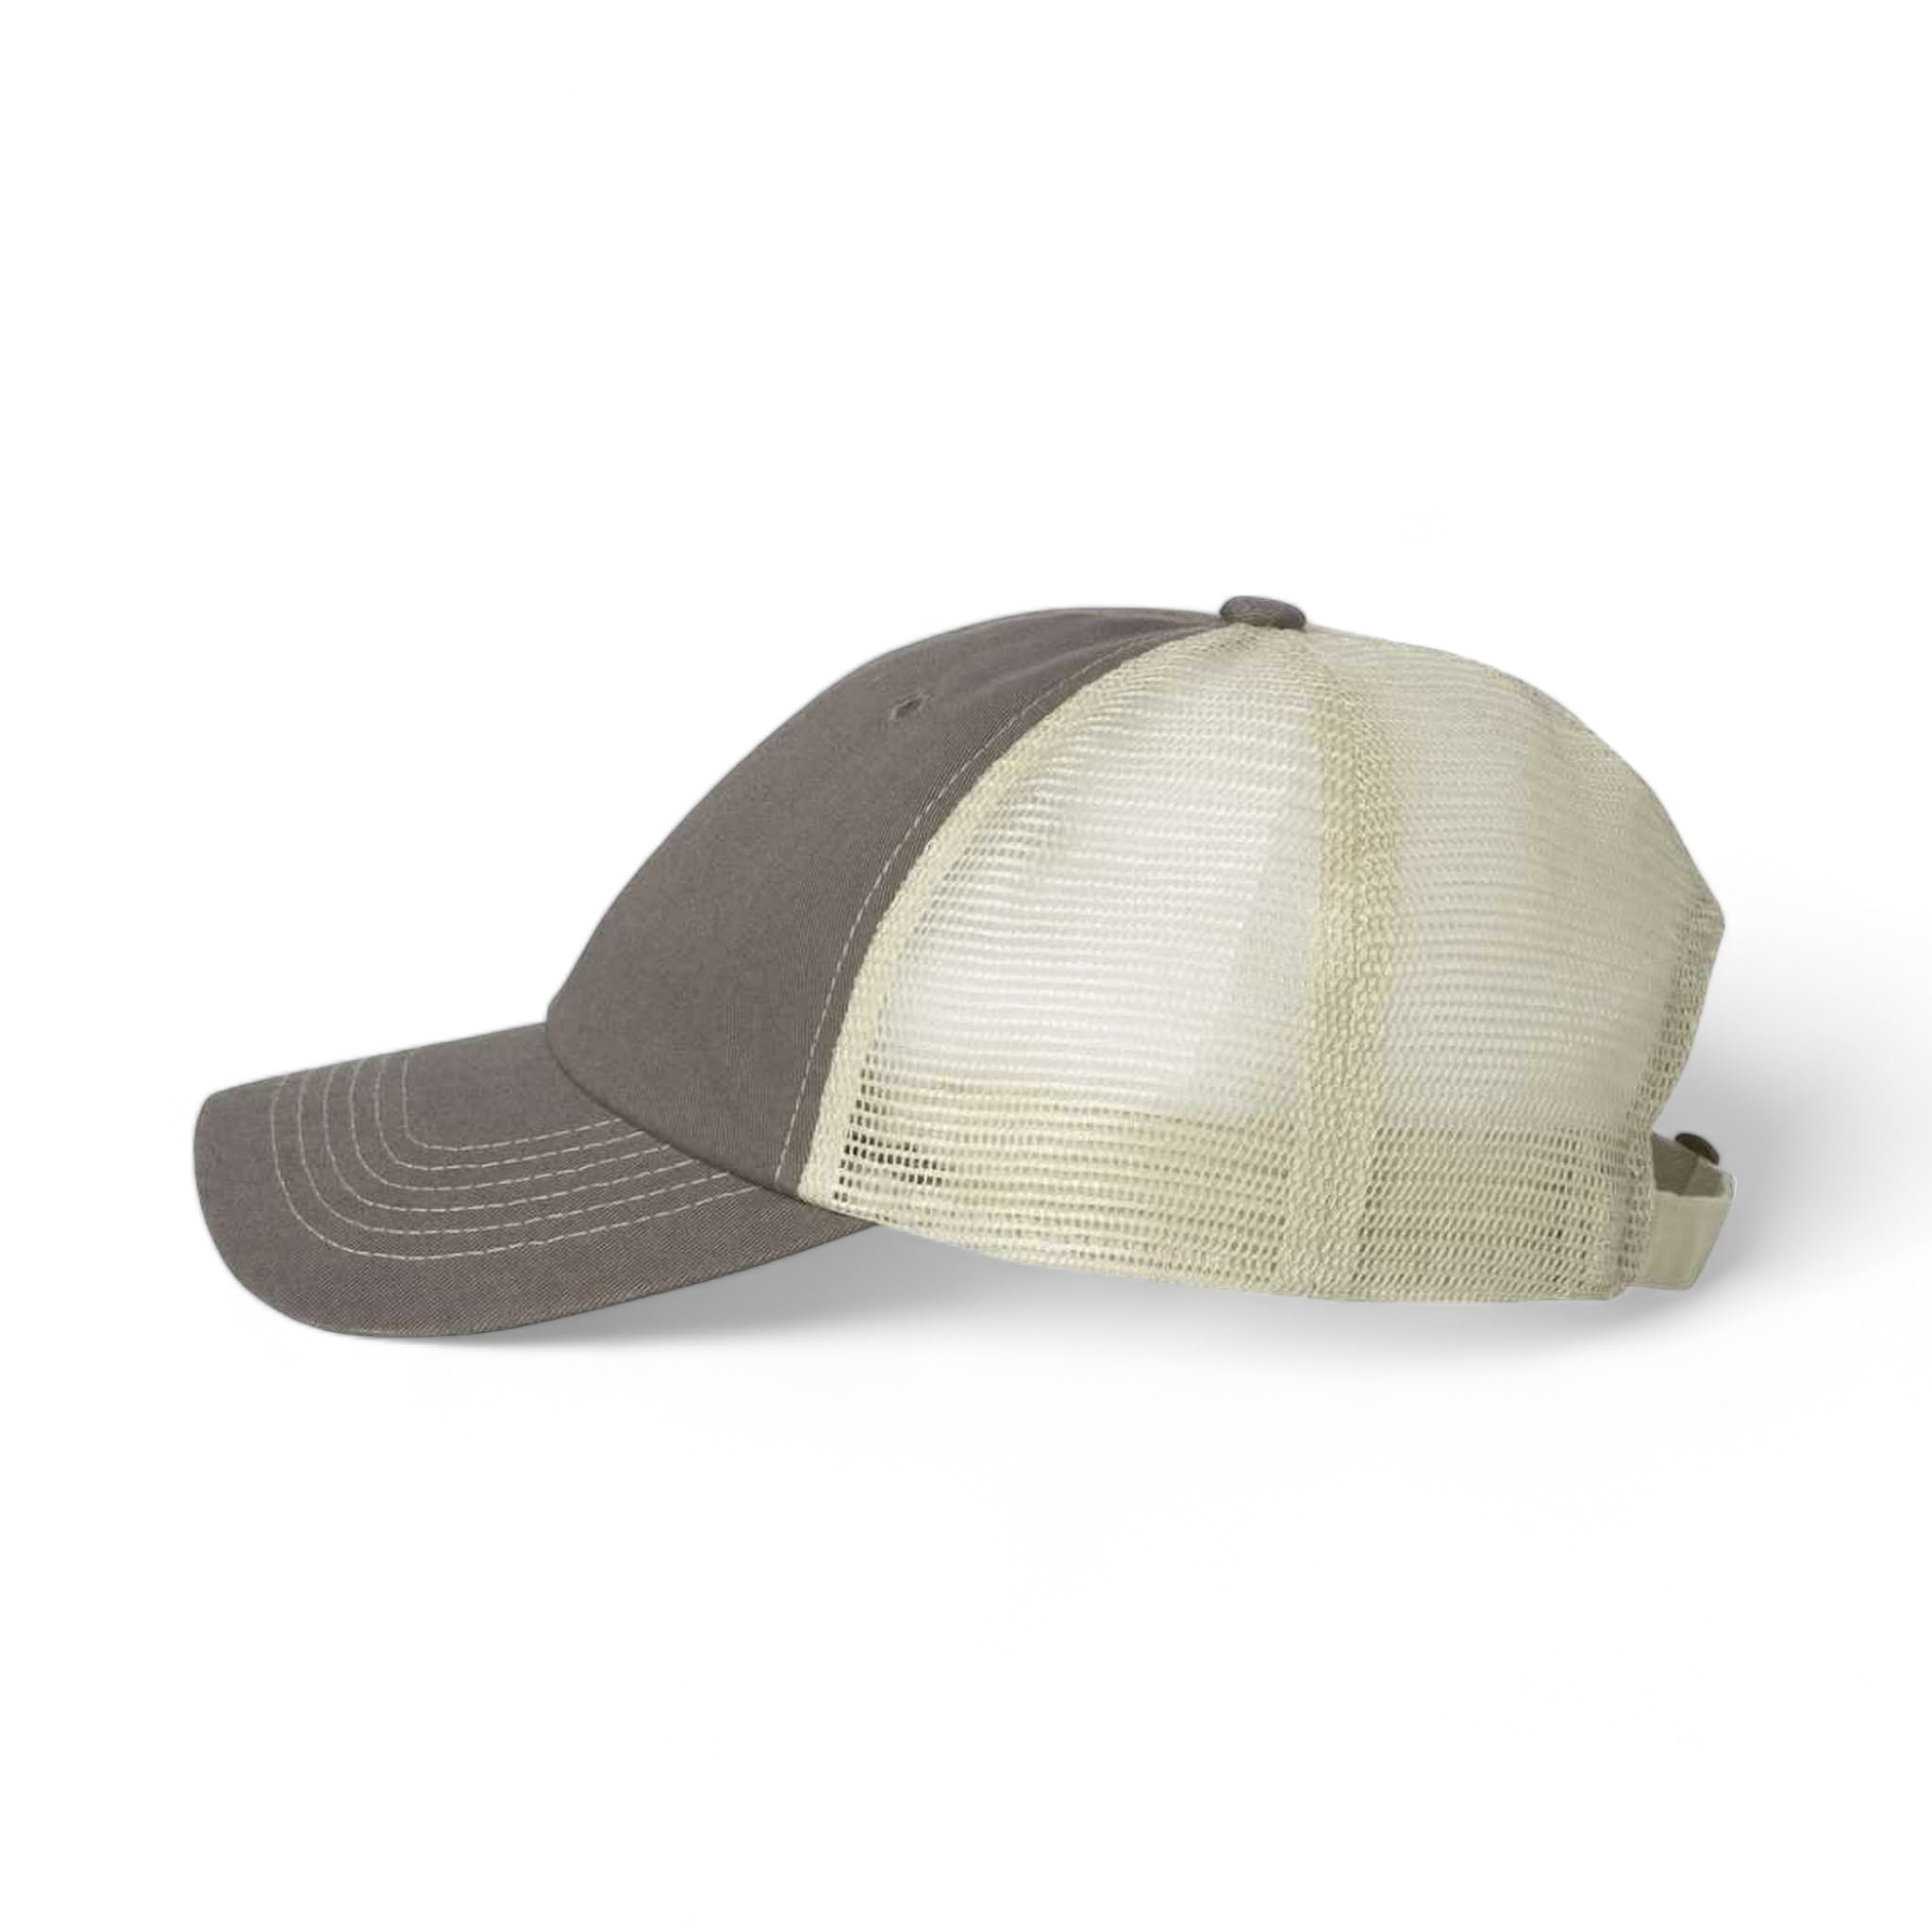 Side view of Sportsman 3100 custom hat in charcoal and stone